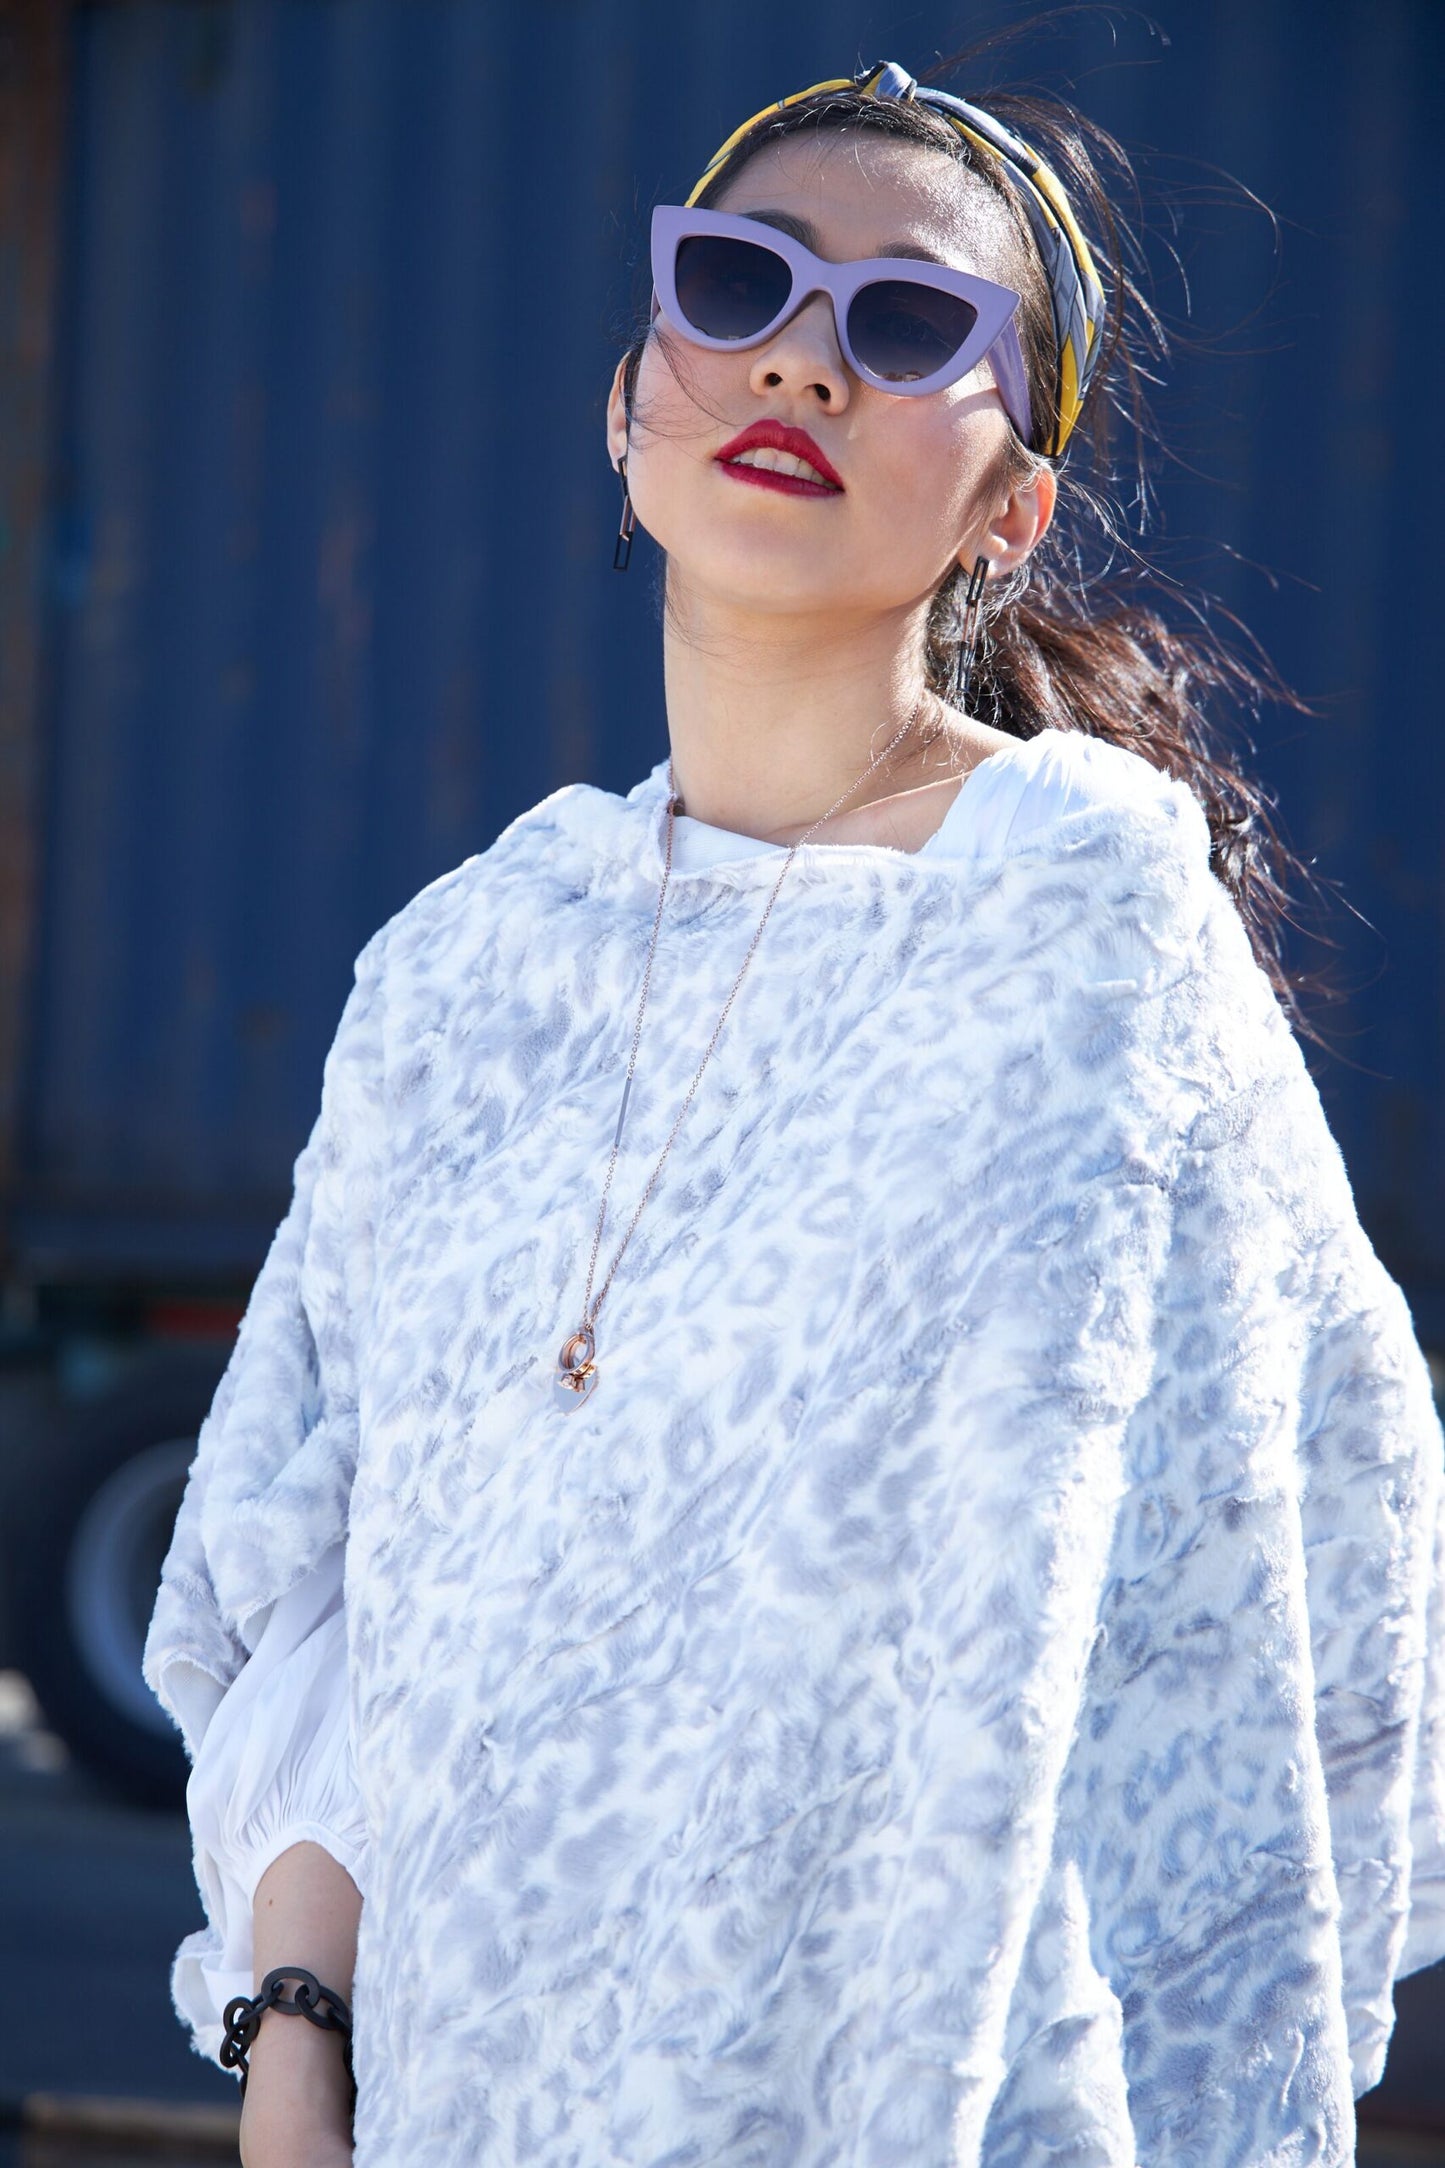 Alternative pose of a woman wearing a Cream and Silver Wild Jacquard Poncho